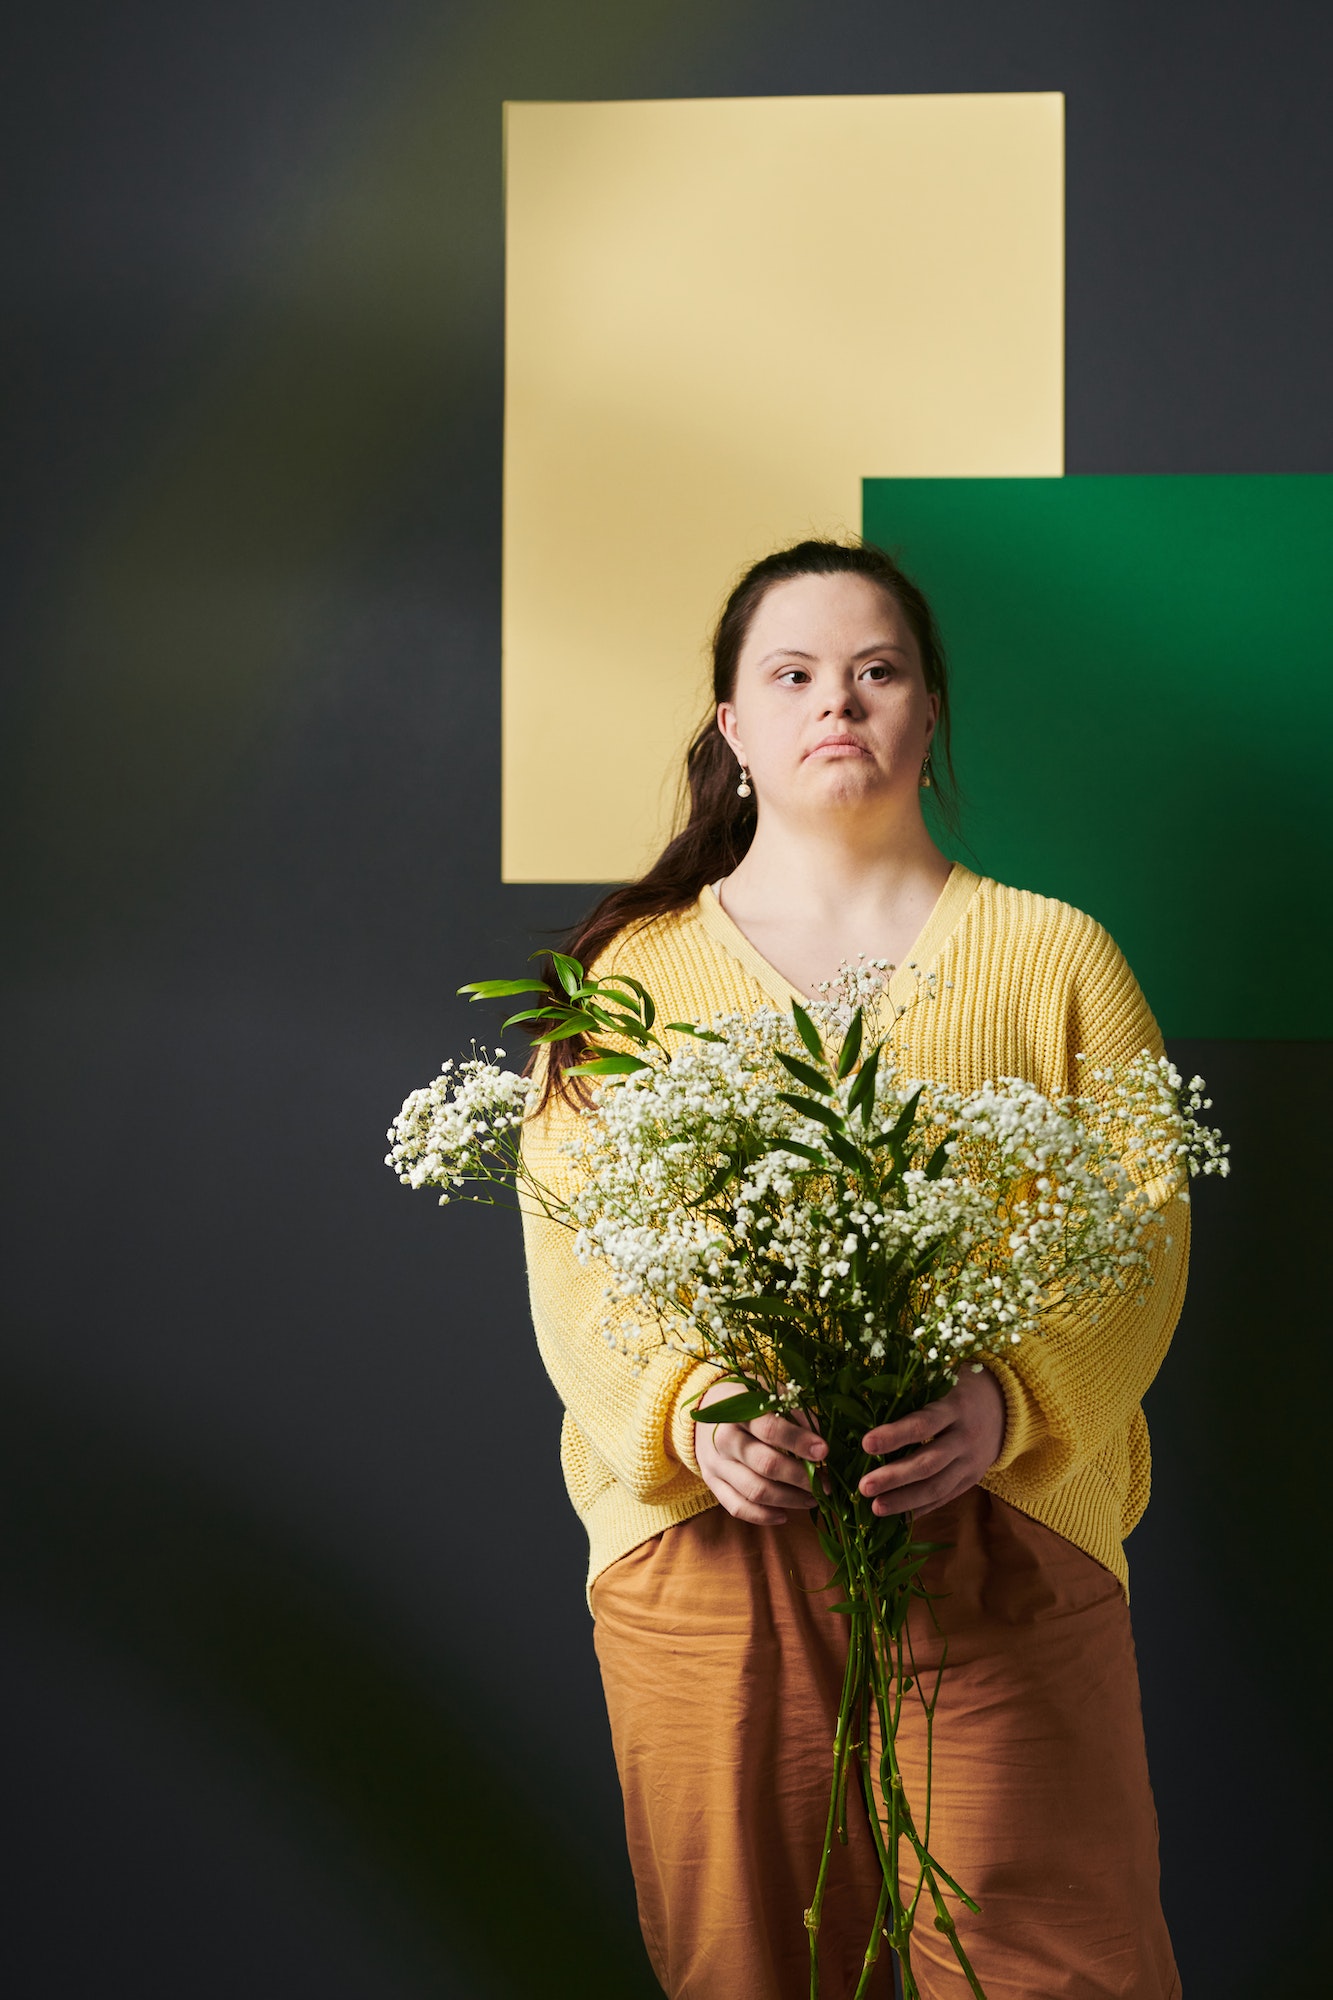 Stylish Woman With Down Syndrome